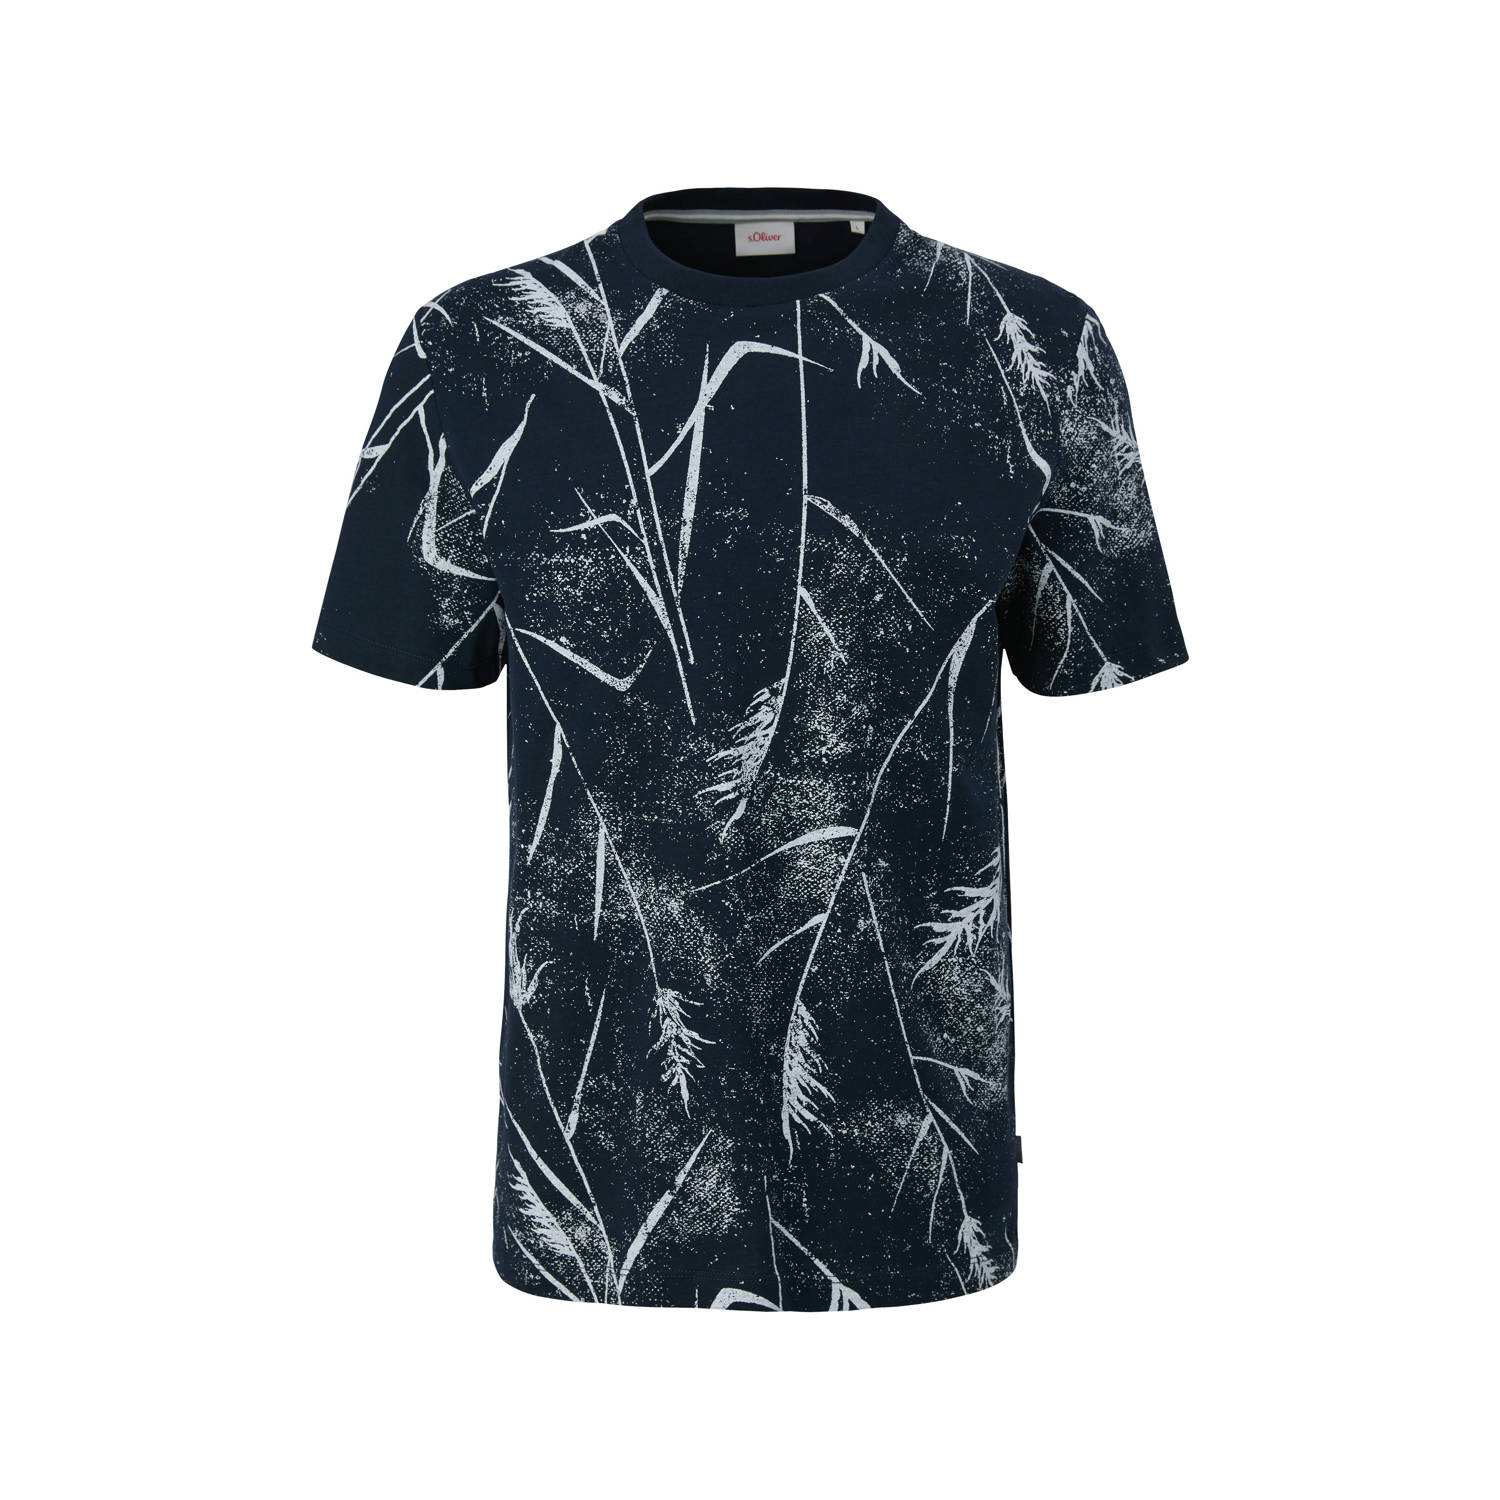 s.Oliver T-shirt met all over print marine